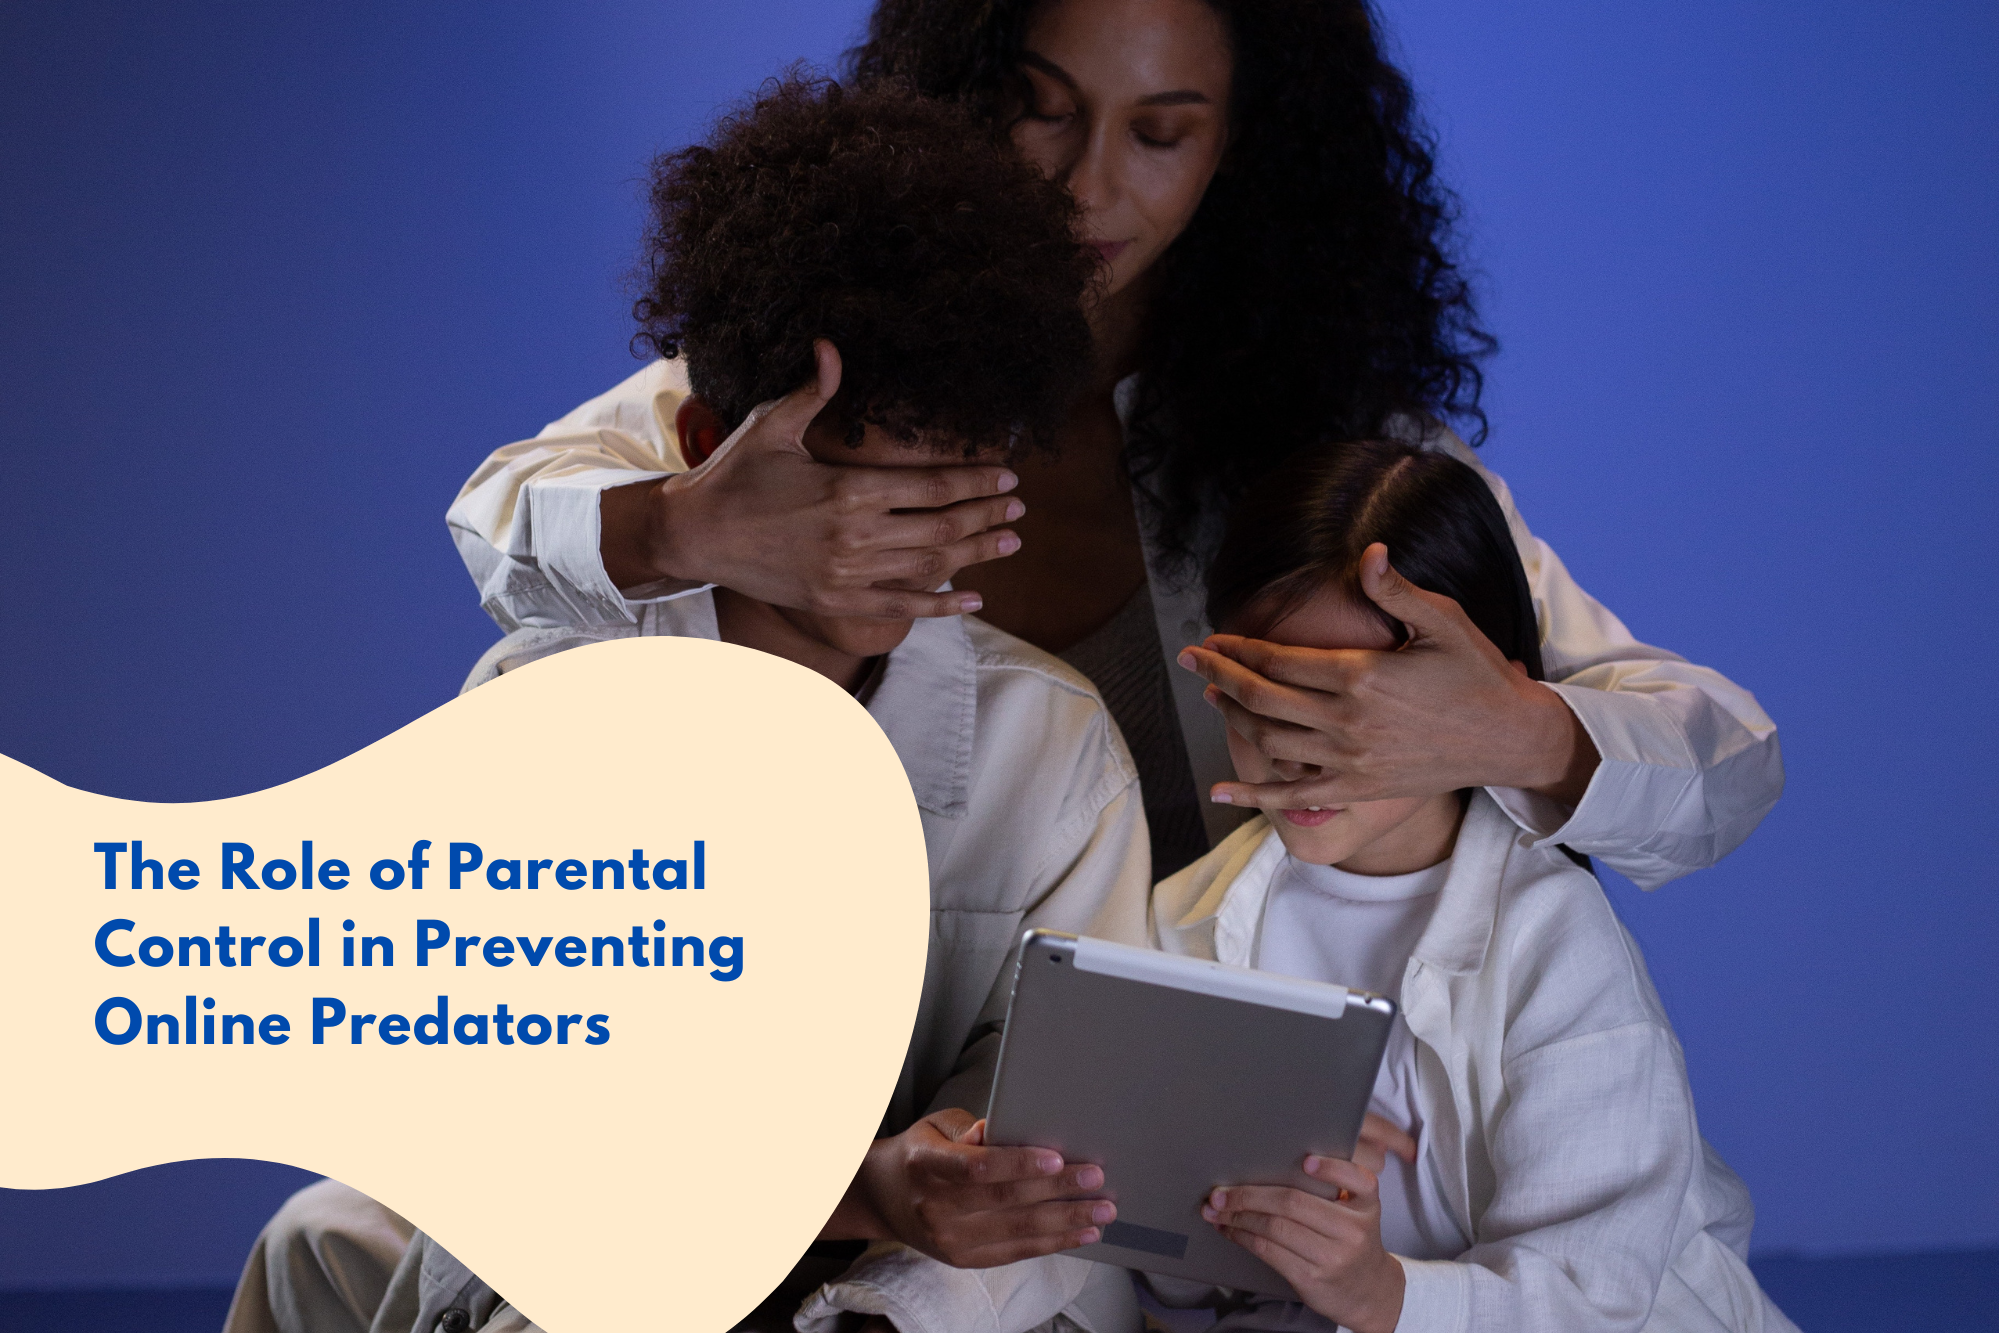 The Role of Parental Control in Preventing Online Predators